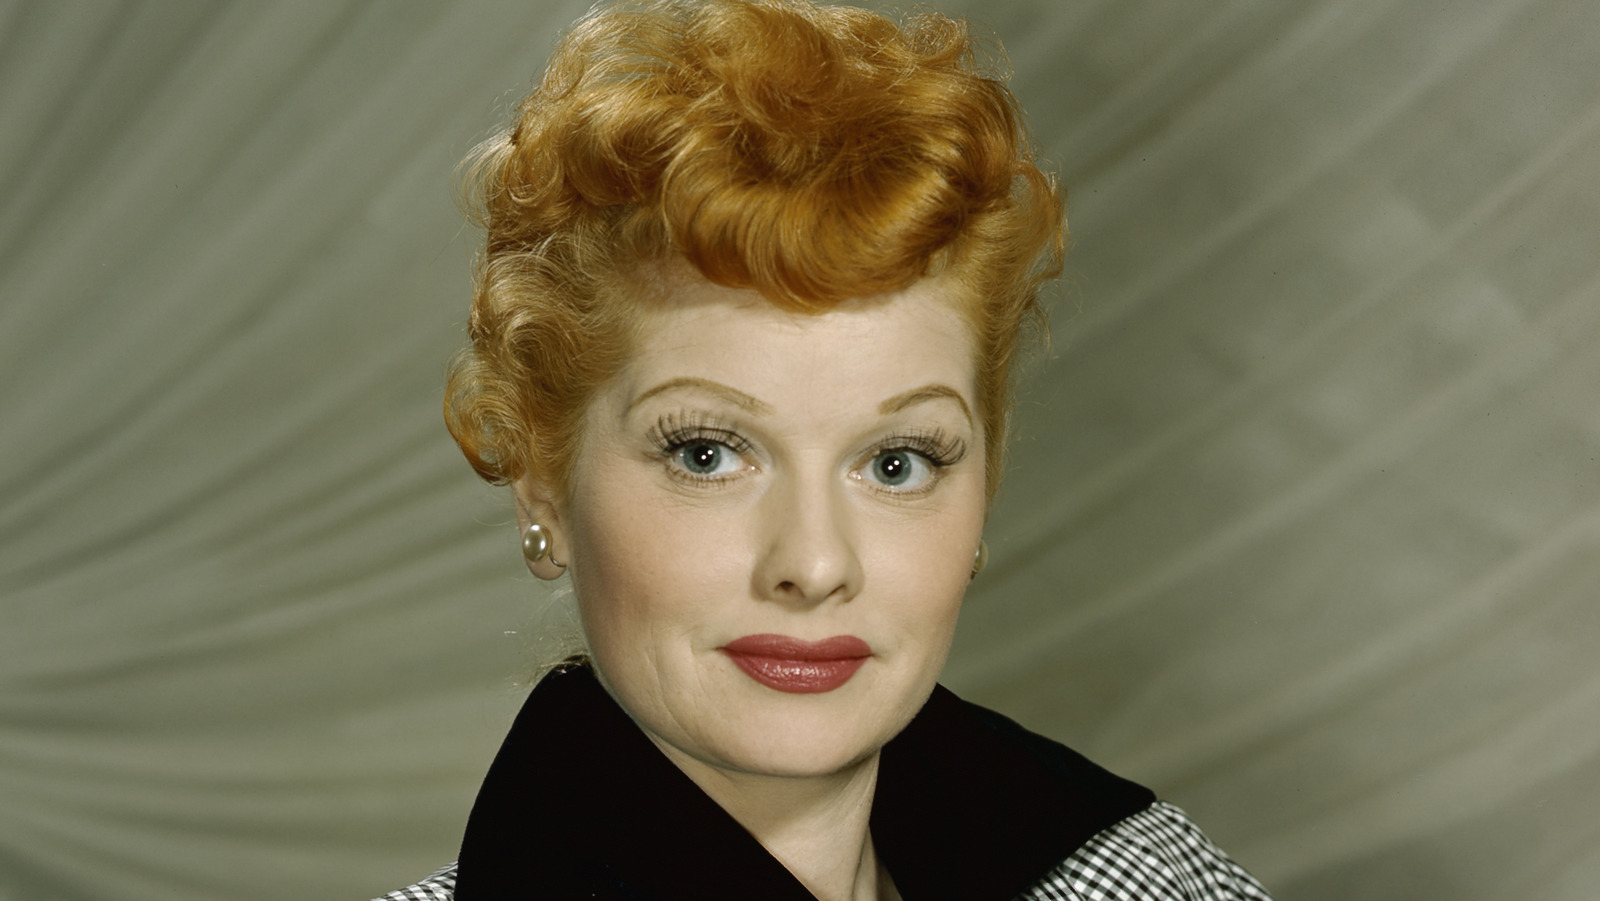 Tragic Details About Lucille Ball's Life